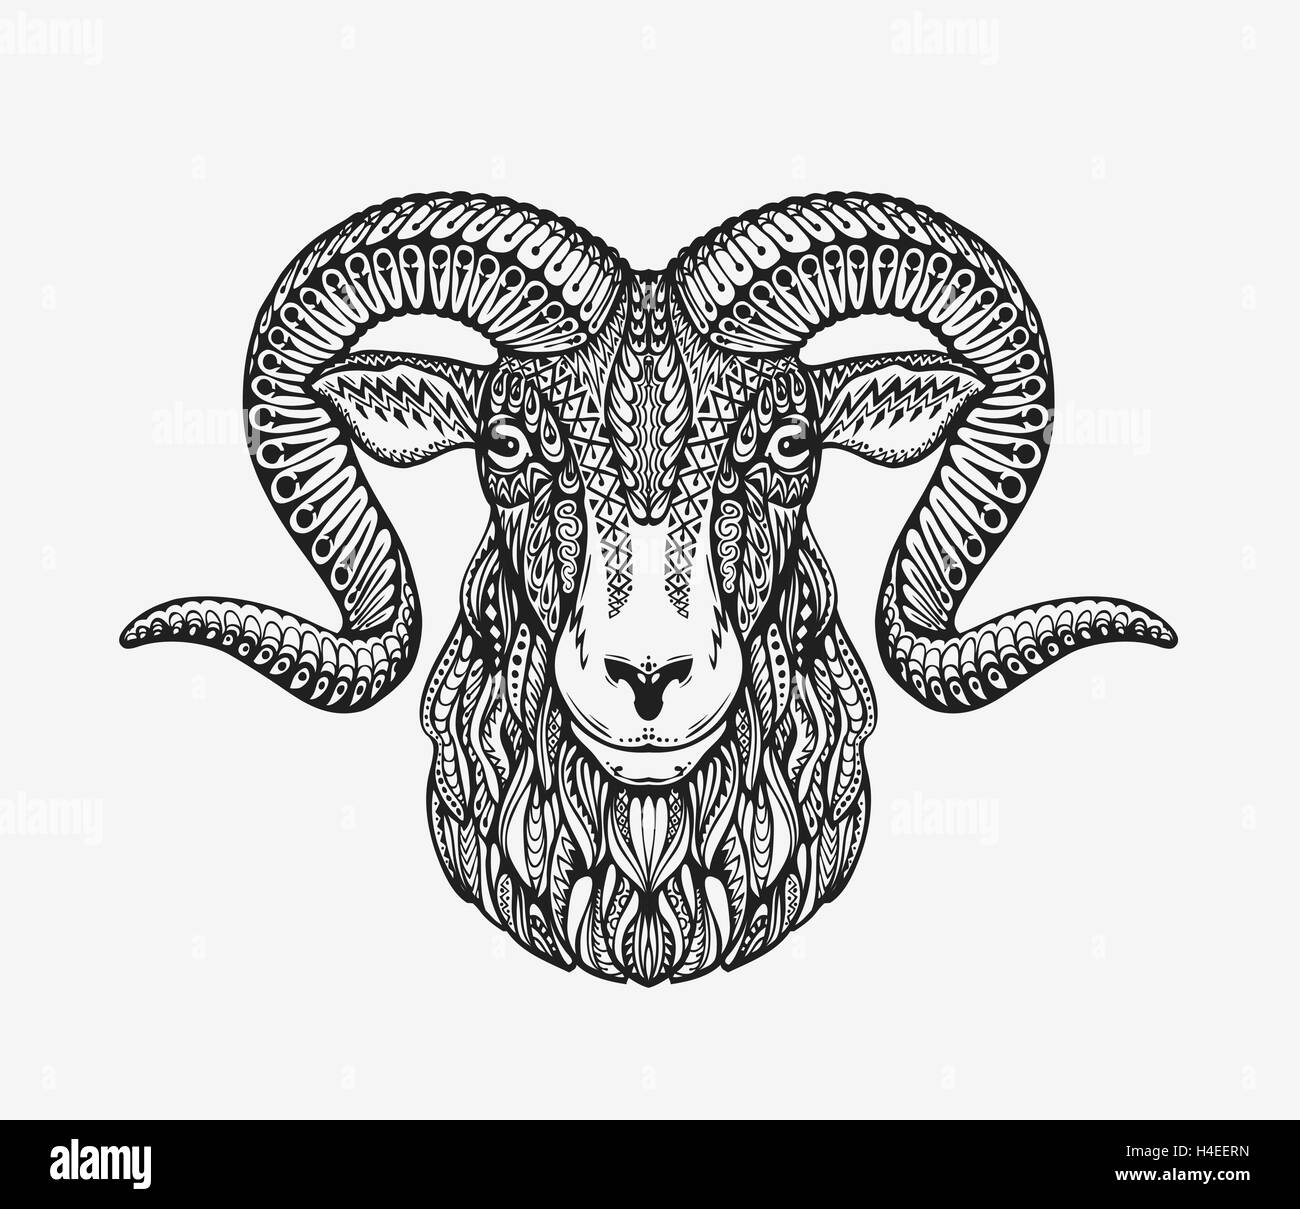 Sheep, ram or mountain goat. Animal decorated with ethnic patterns. Vector illustration Stock Vector